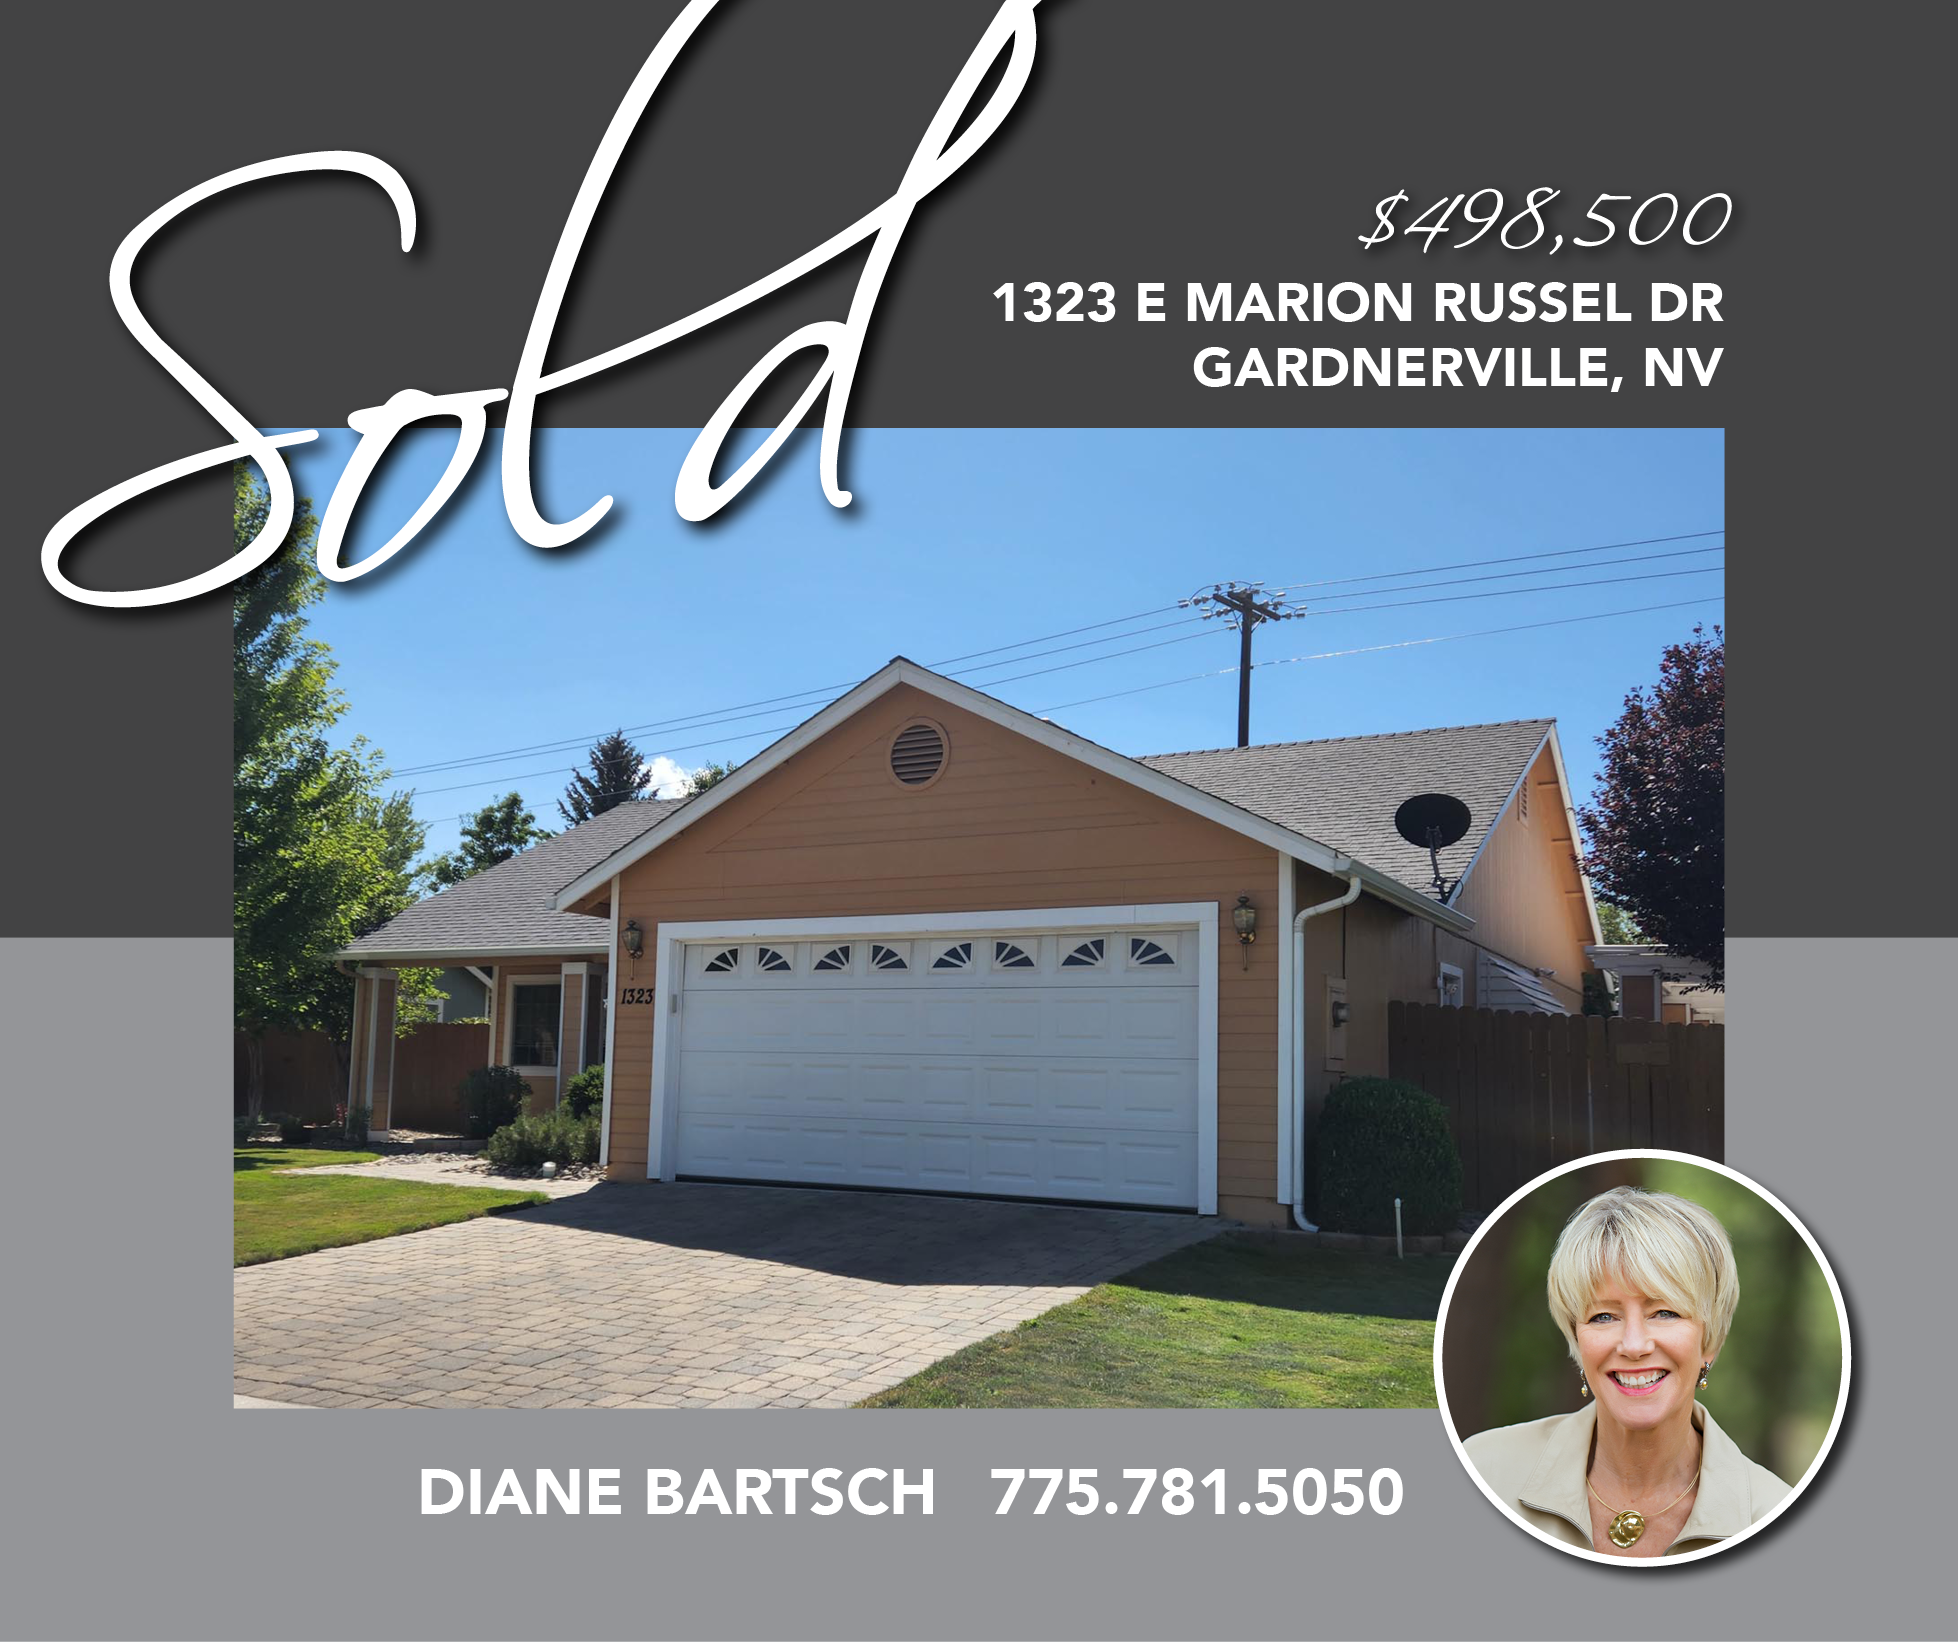 1323 E Marion Russel Dr sold for $498,500